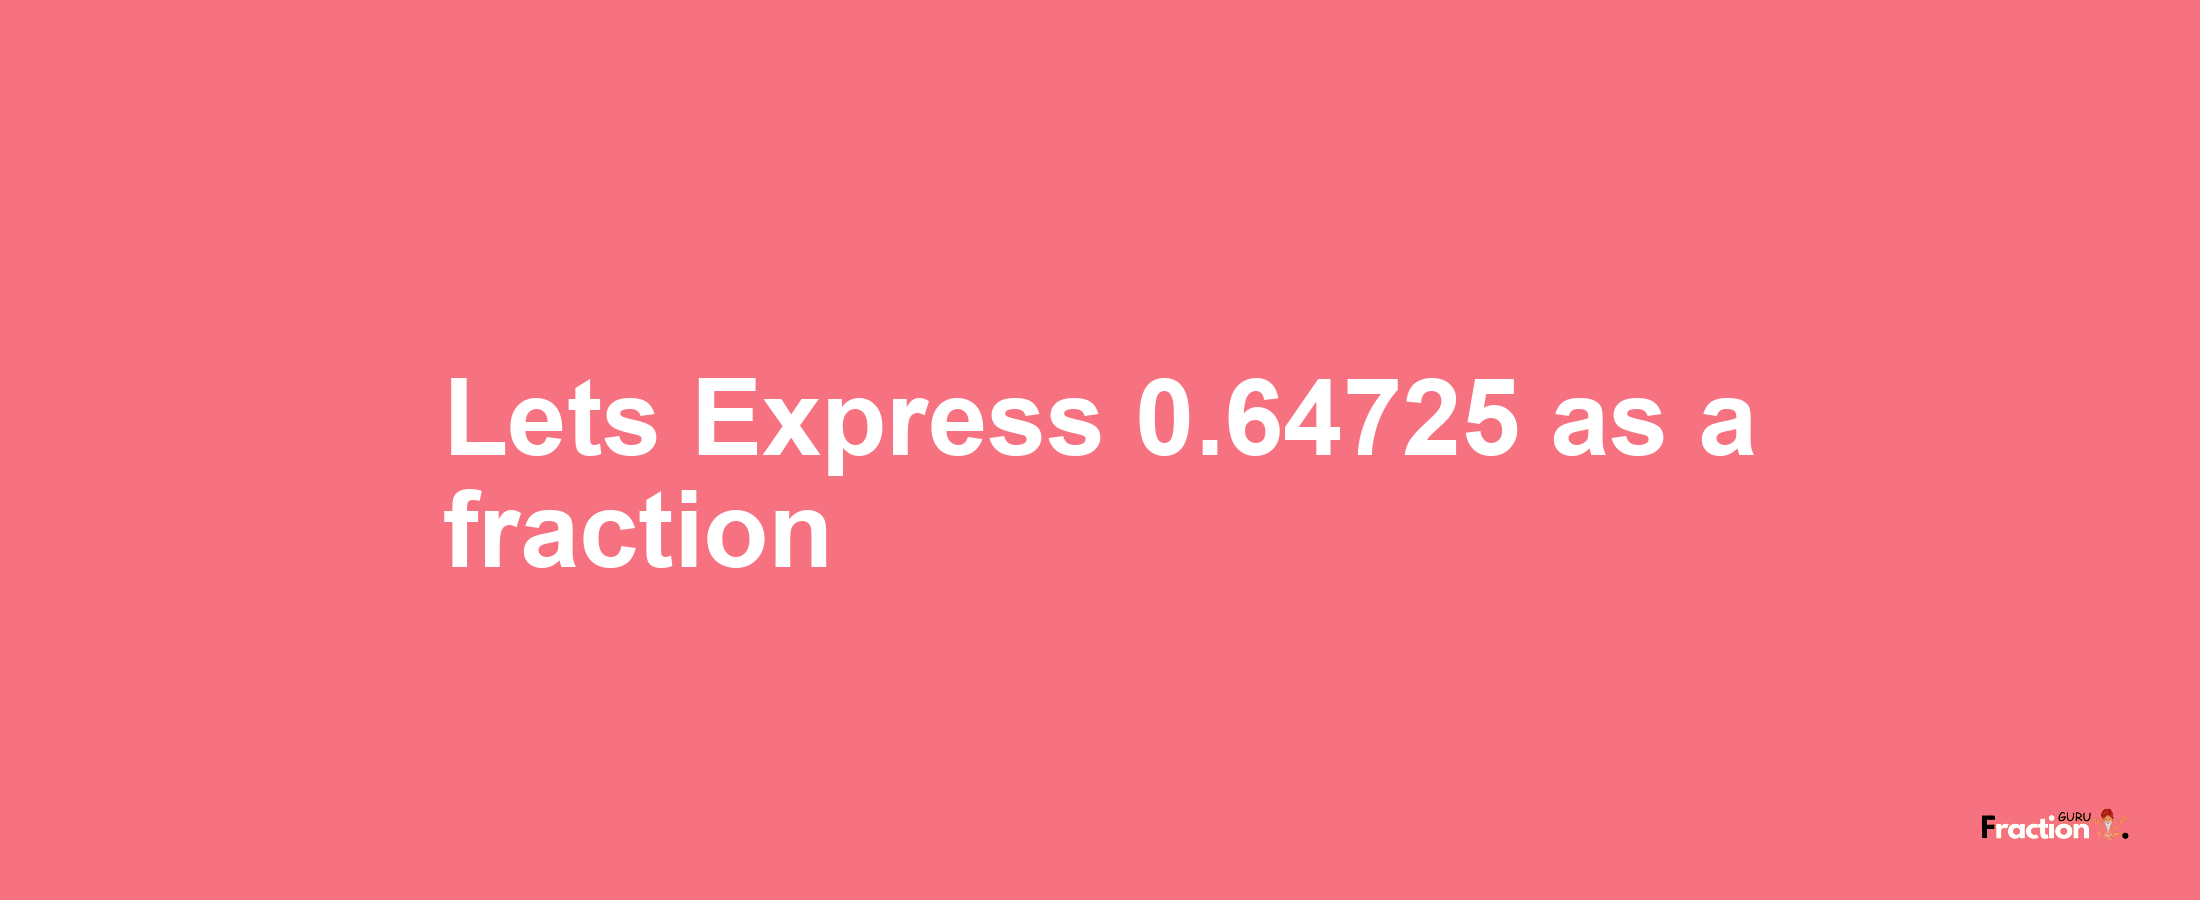 Lets Express 0.64725 as afraction